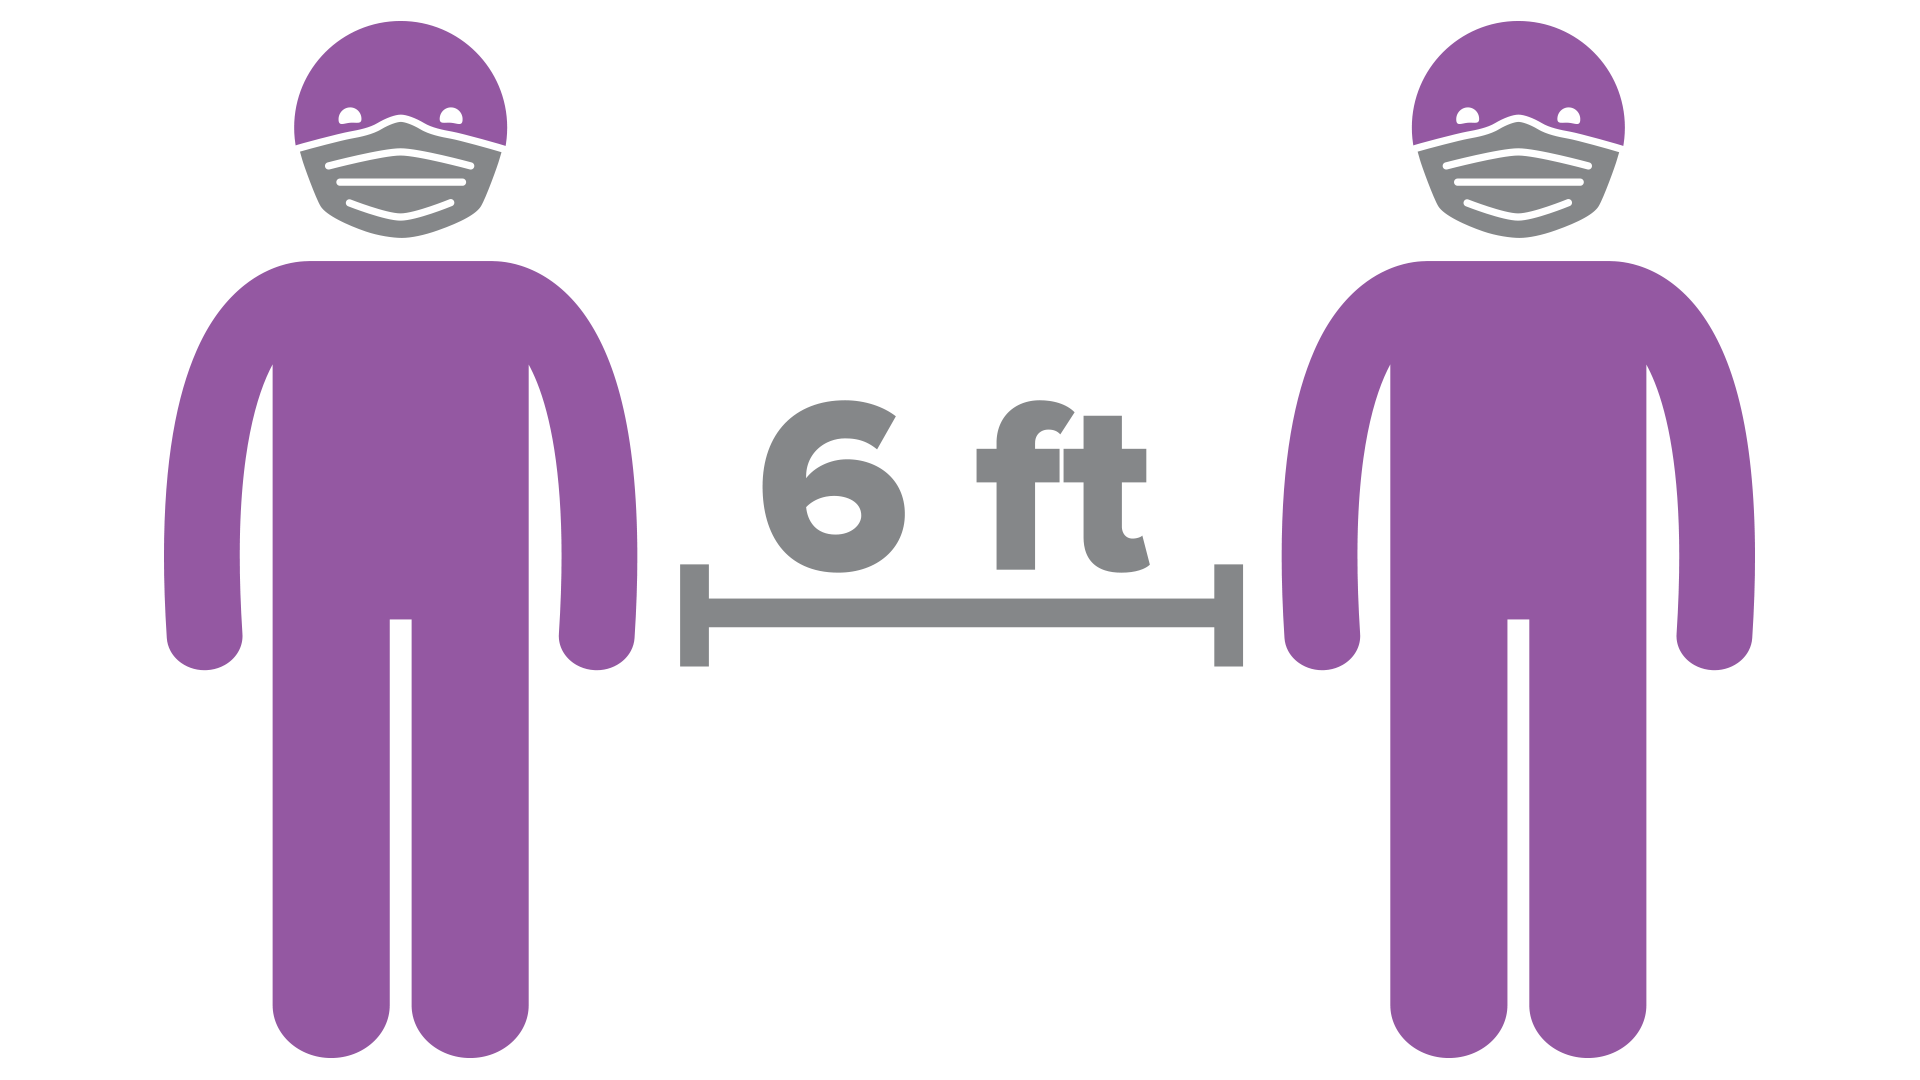 icon showing two people wearing face masks standing 6 feet apart